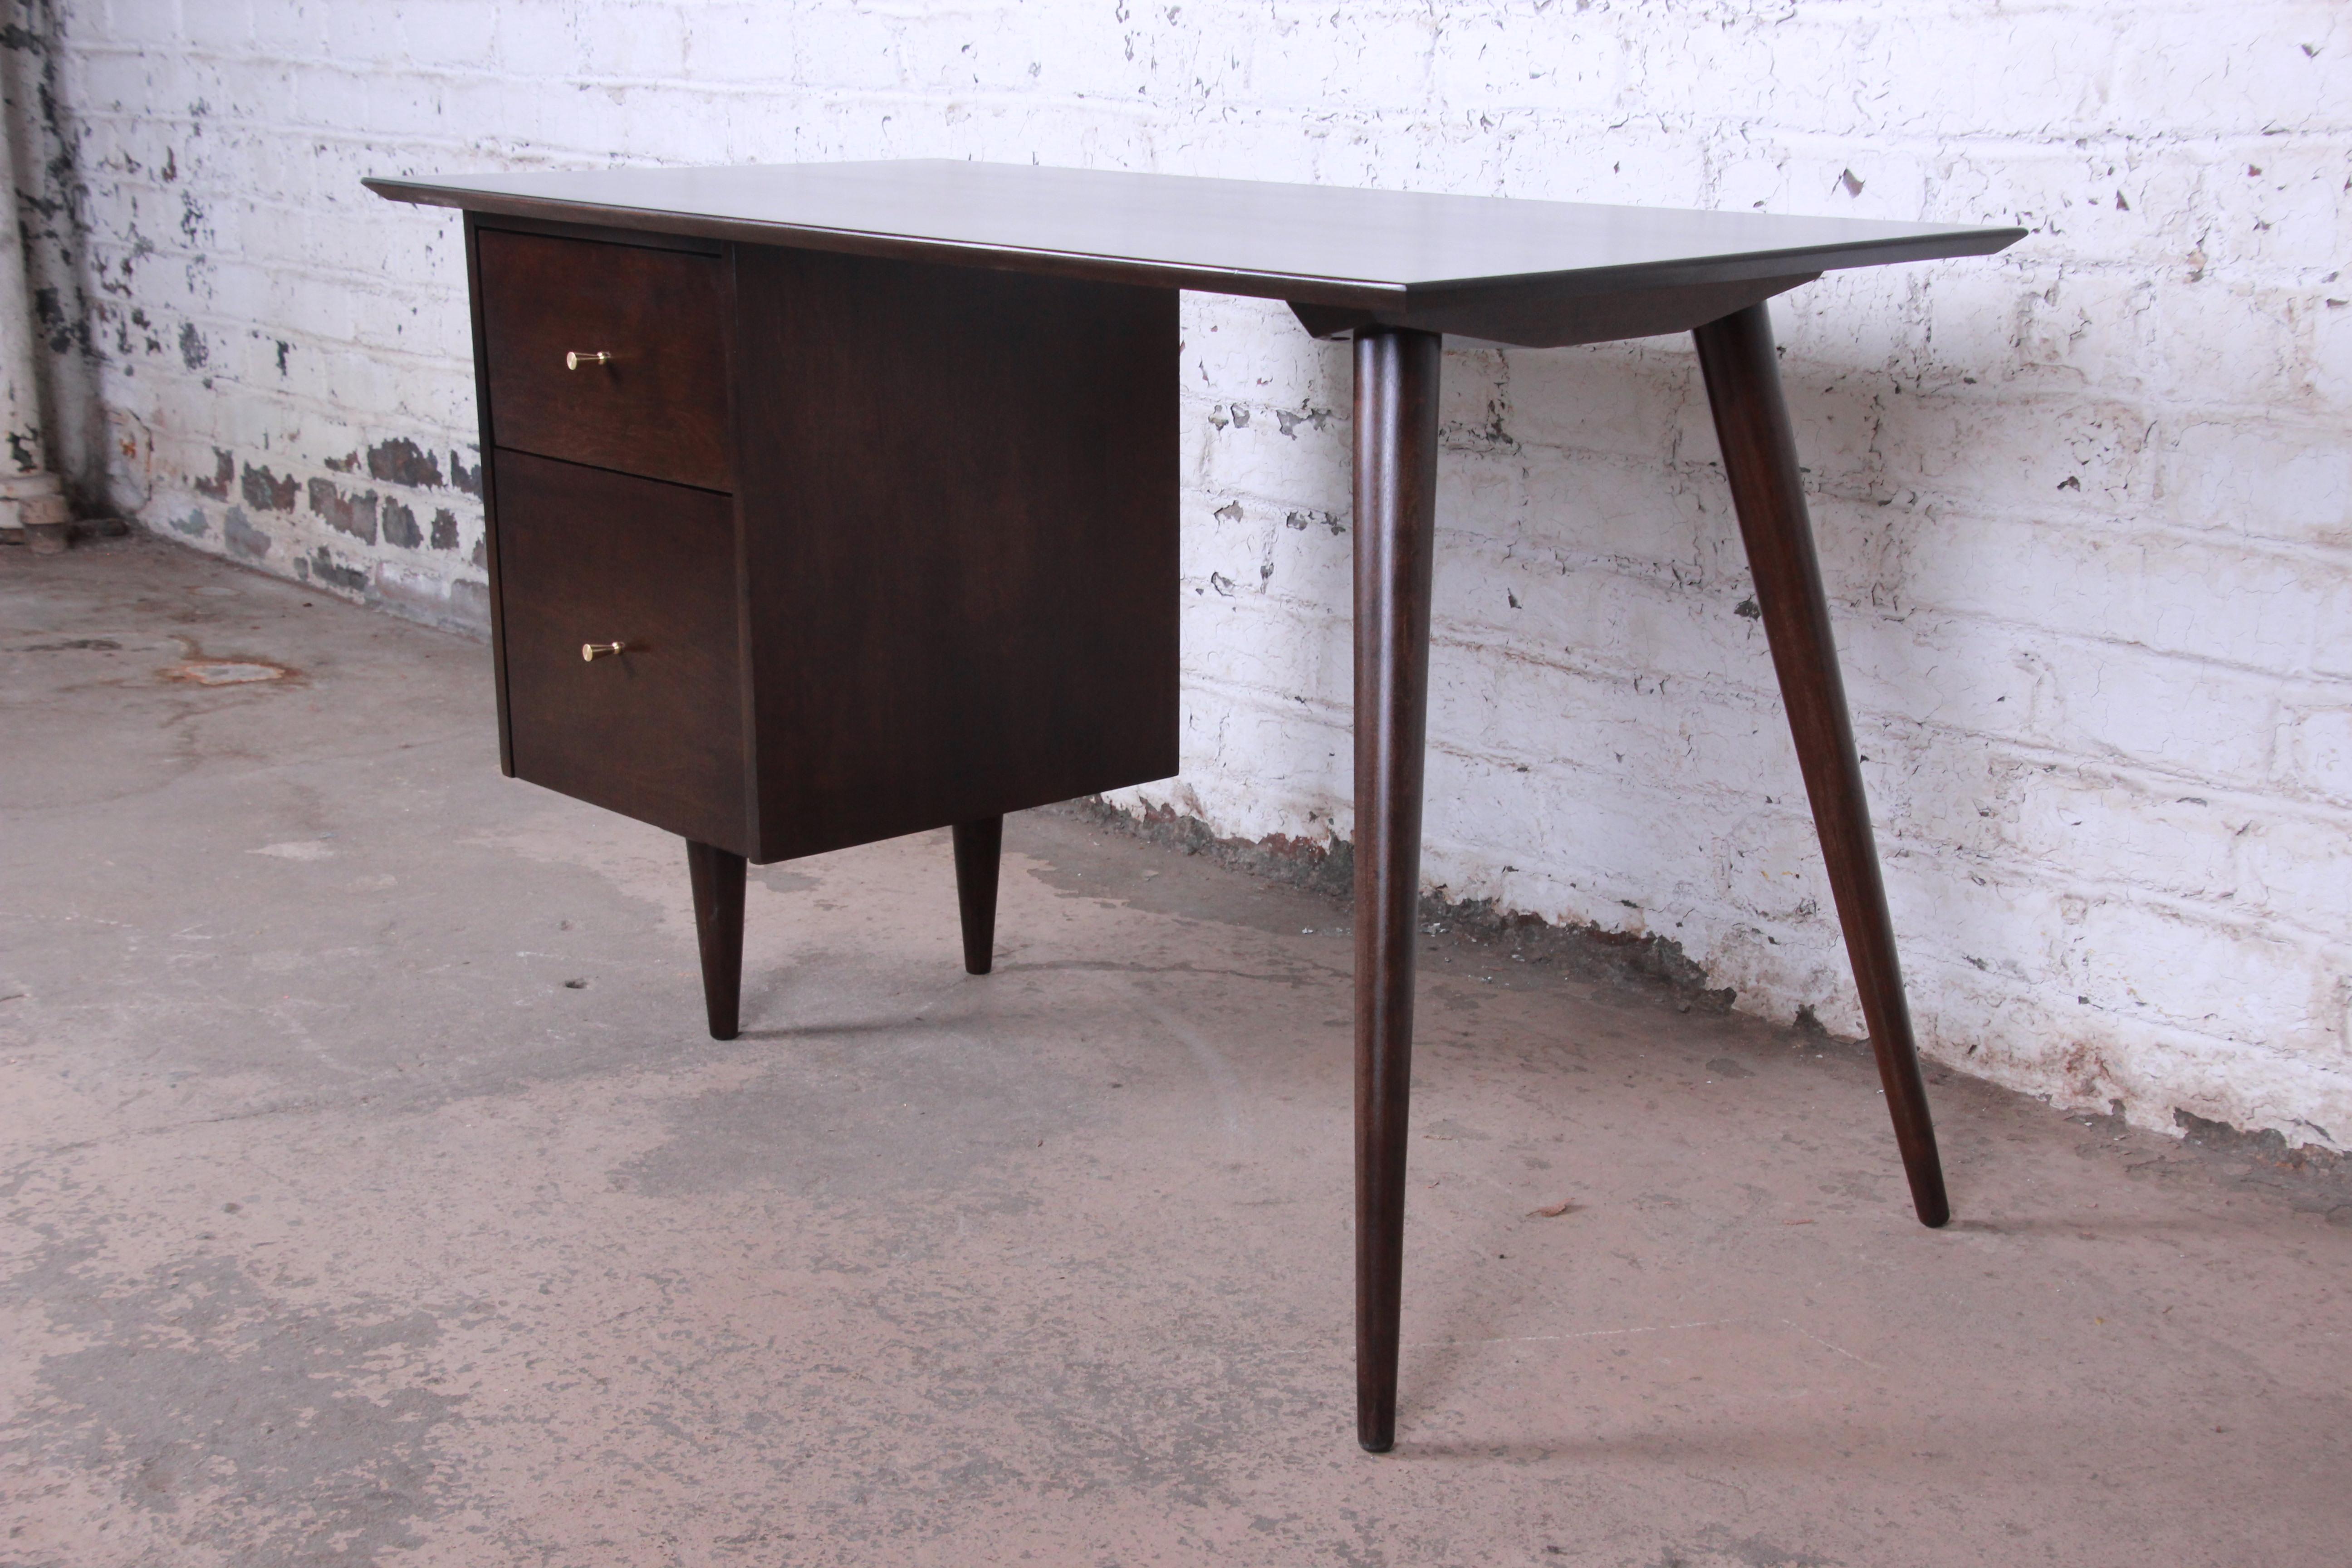 An exceptional Mid-Century Modern desk designed by Paul McCobb for his Planner Group line for Winchedon Furniture. The desk features solid birch construction and sleek Minimalist midcentury design. It has a single pedestal with two drawers on the